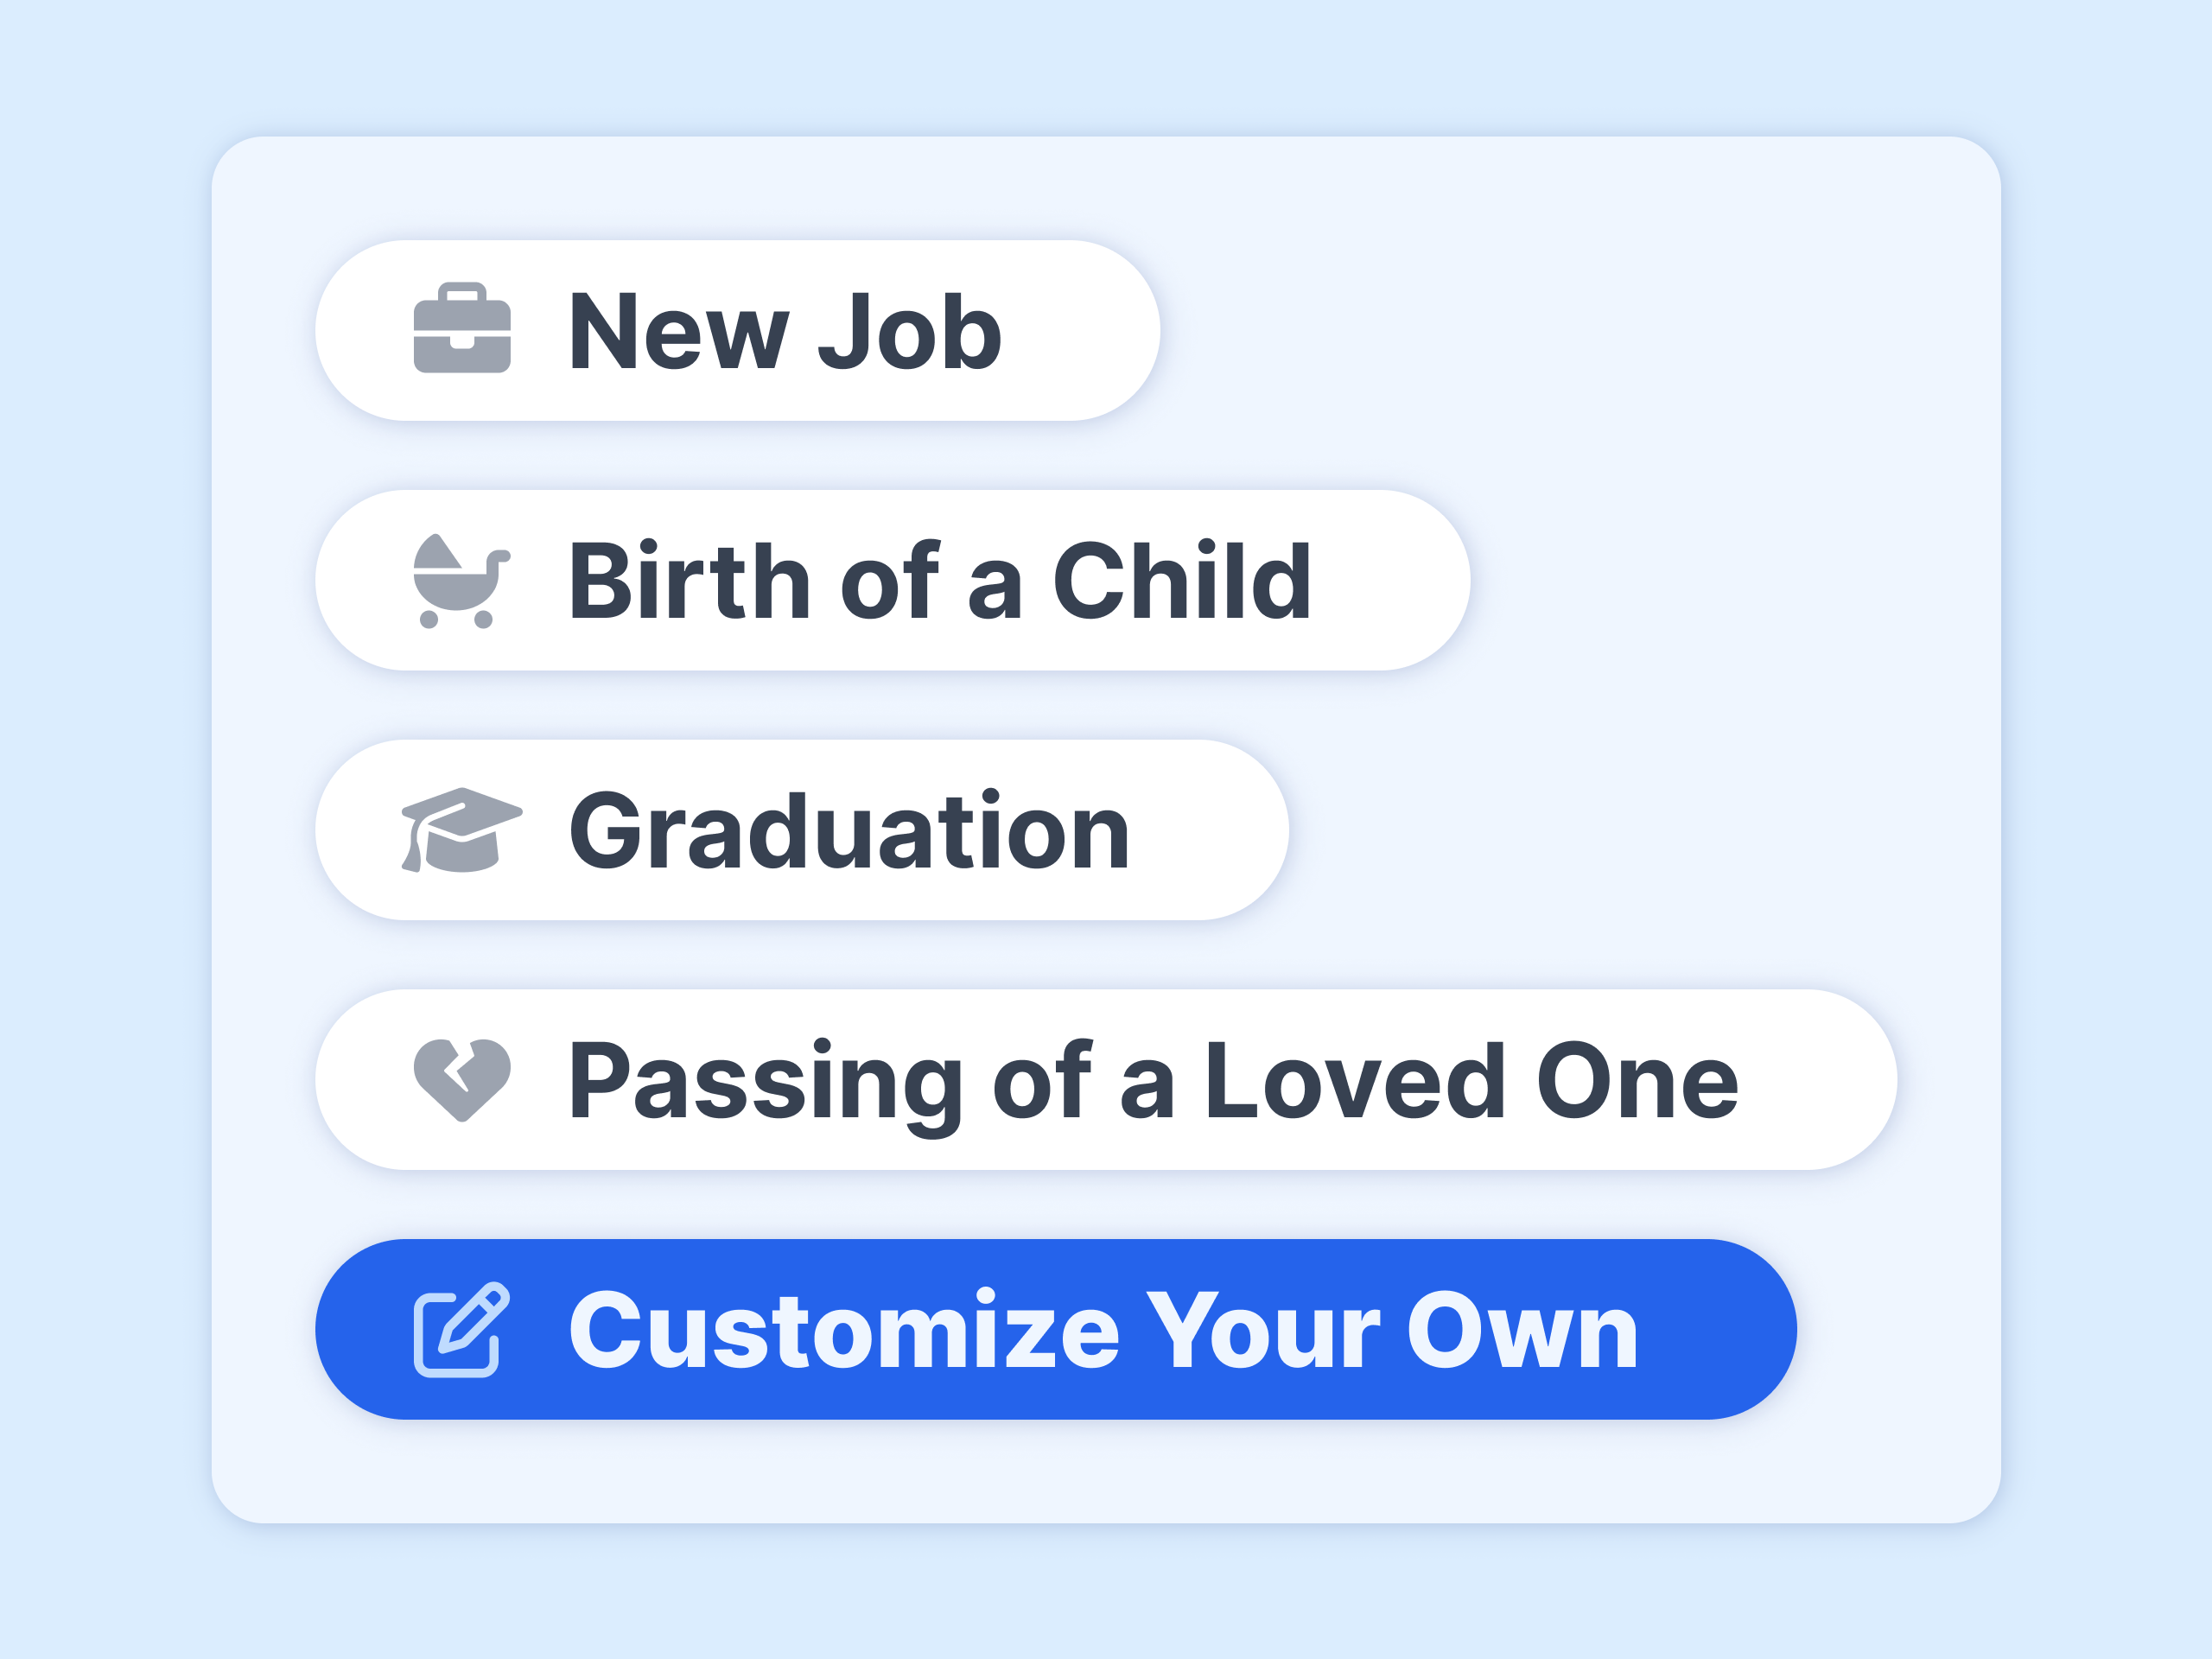 Store milestones like births, graduations, weddings, anniversaries, memorial dates and more and get an annual reminder of these important dates. Choose from presets or customize your own.